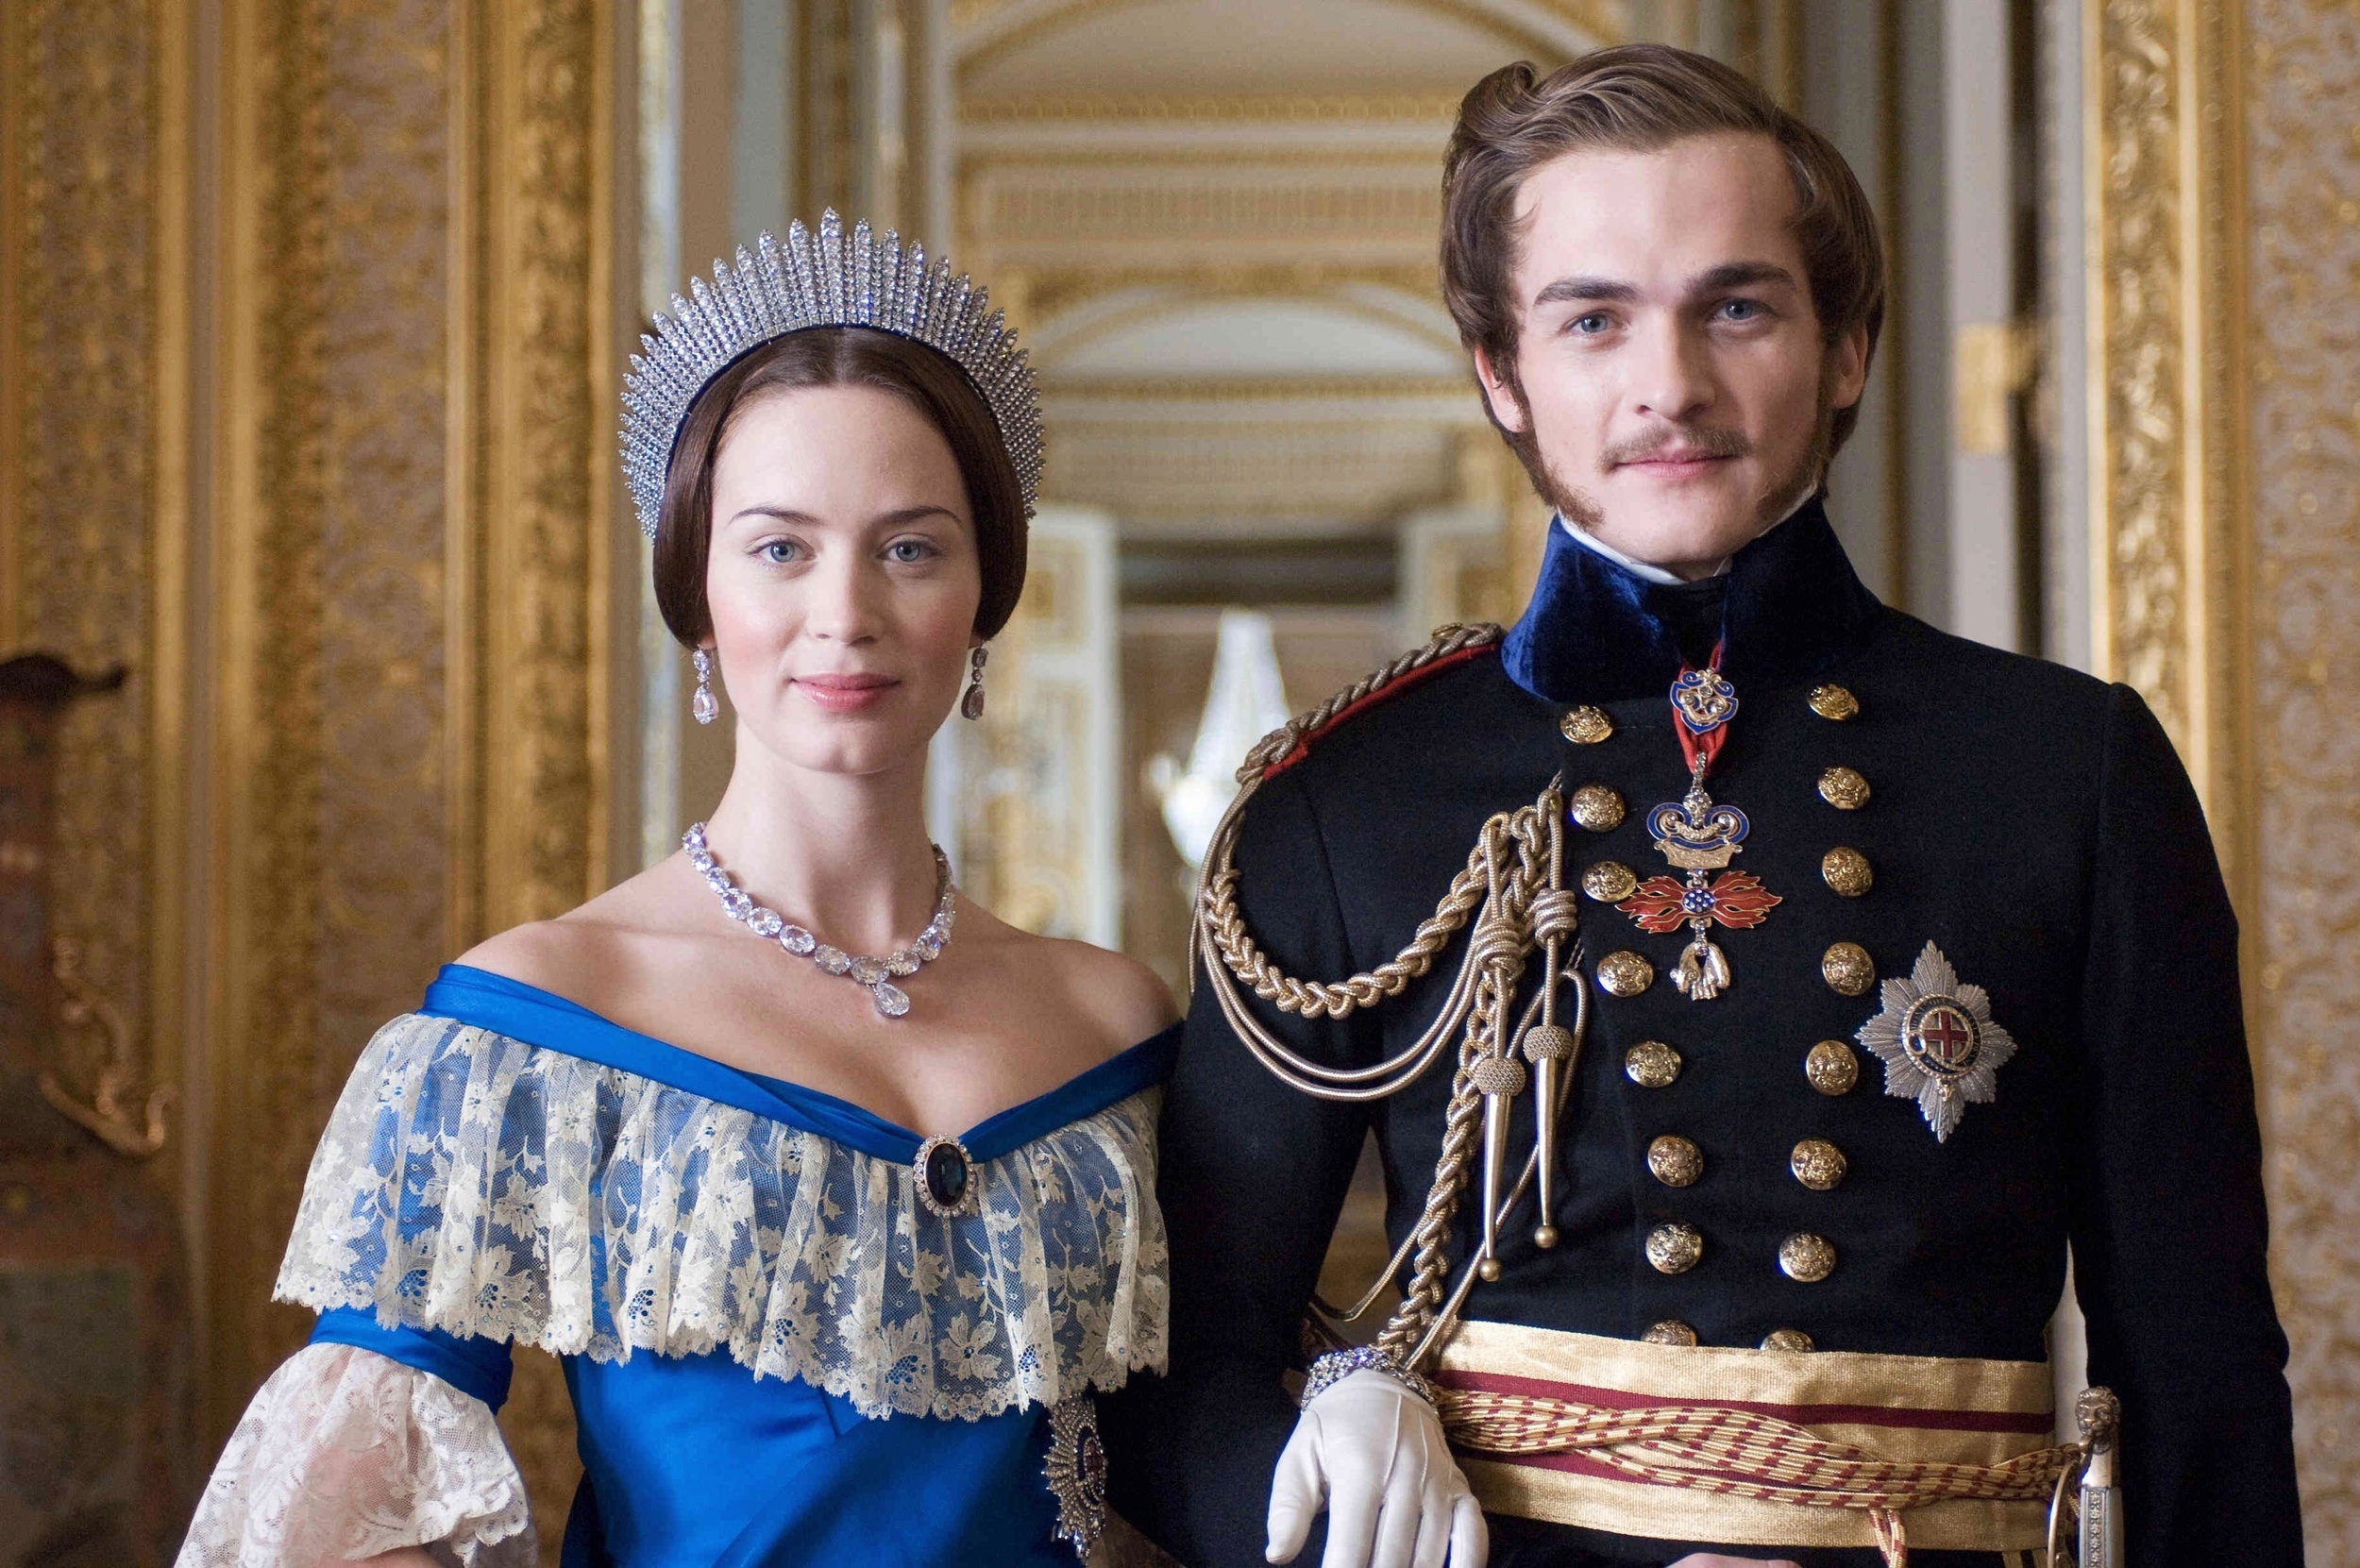 <p>Queen Victoria is one of England’s most famous monarchs, but she usually only pops up fleetingly in films, like various Sherlock Holmes tales. She got to be the star of <em>The Young Victoria</em>, though, with Emily Blunt in the role. Julian Fellowes, the creator of <em>Downton Abbey</em>, wrote the screenplay.</p><p><a href='https://www.msn.com/en-us/community/channel/vid-cj9pqbr0vn9in2b6ddcd8sfgpfq6x6utp44fssrv6mc2gtybw0us'>Follow us on MSN to see more of our exclusive entertainment content.</a></p>